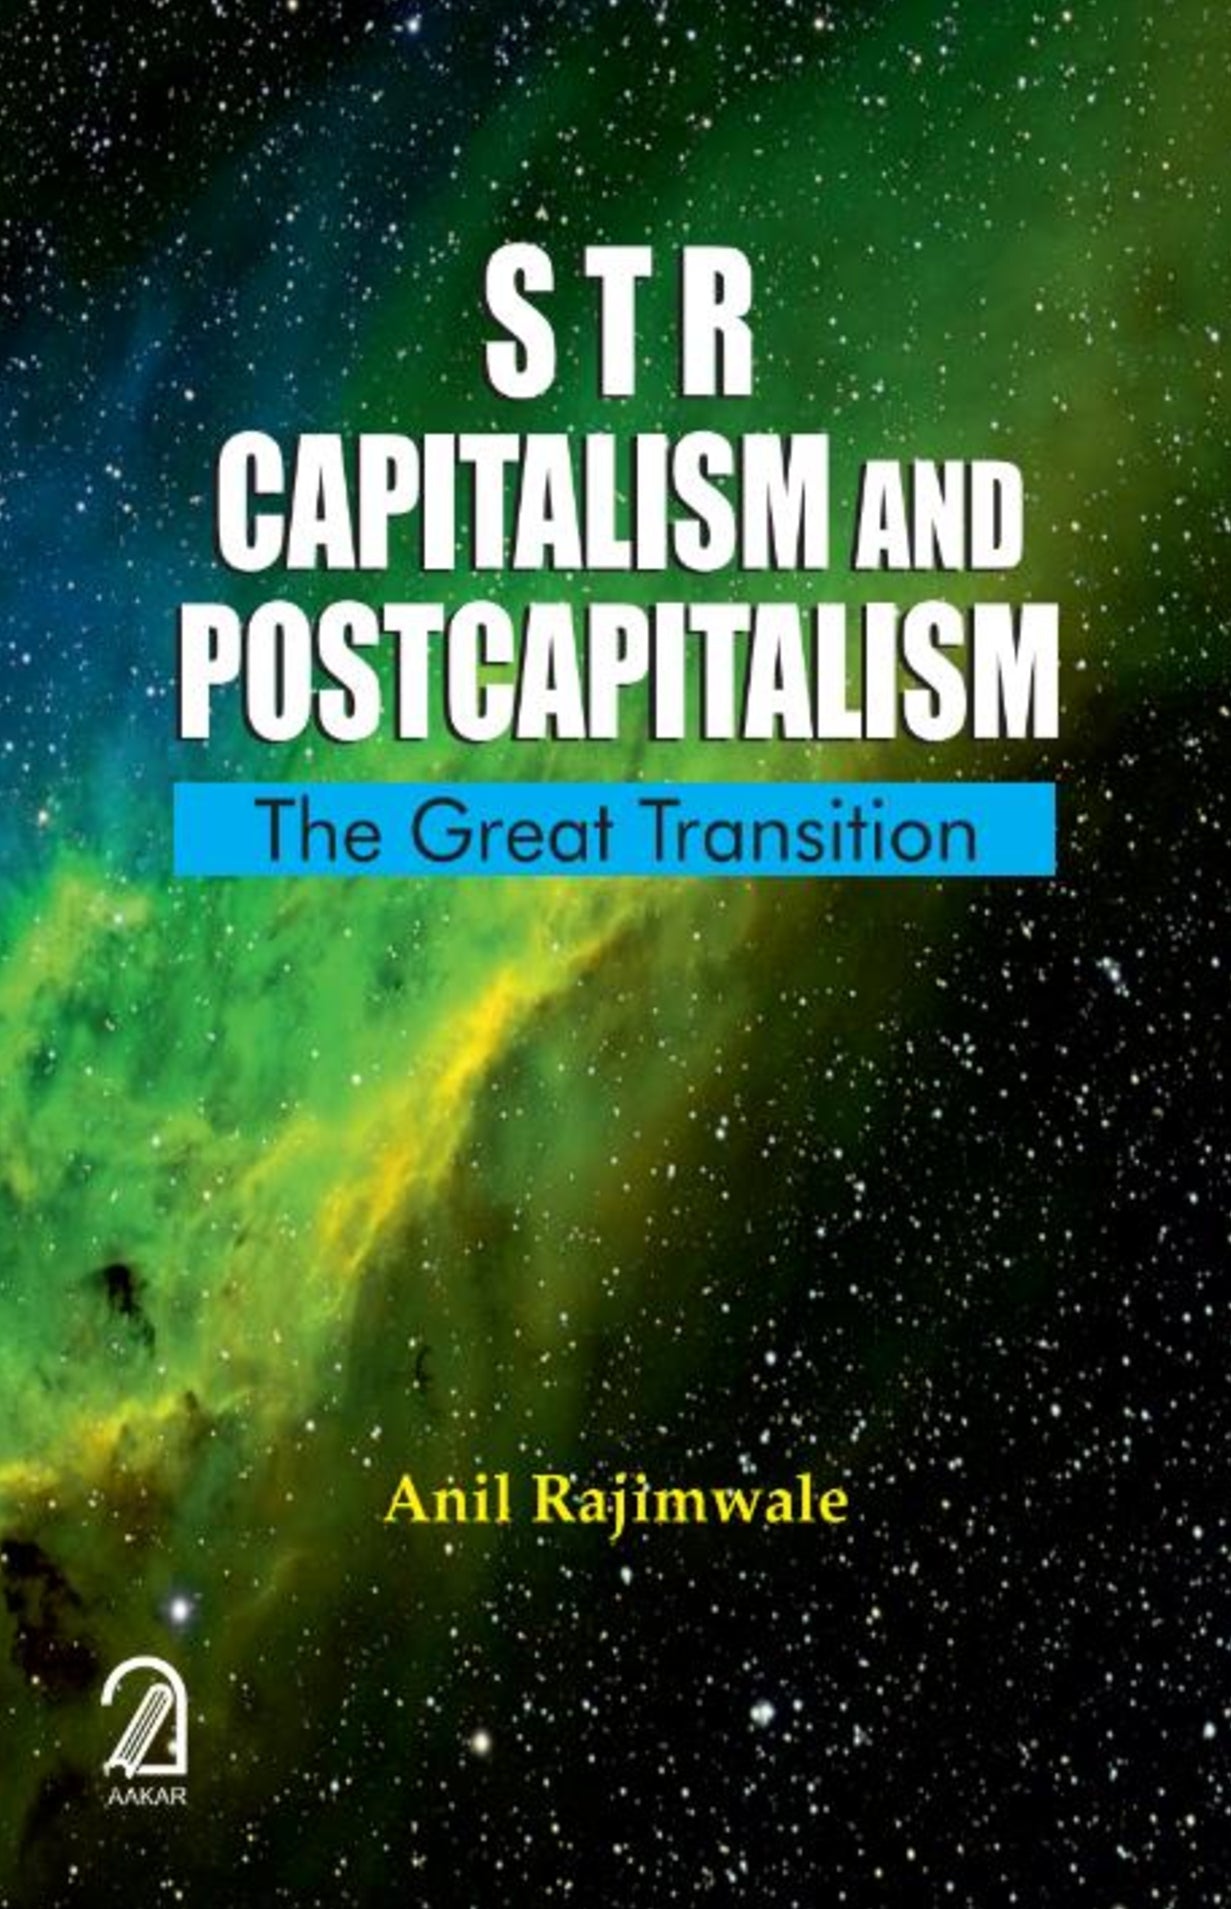 STR Capitalism and Postcapitalism: The Great Transition